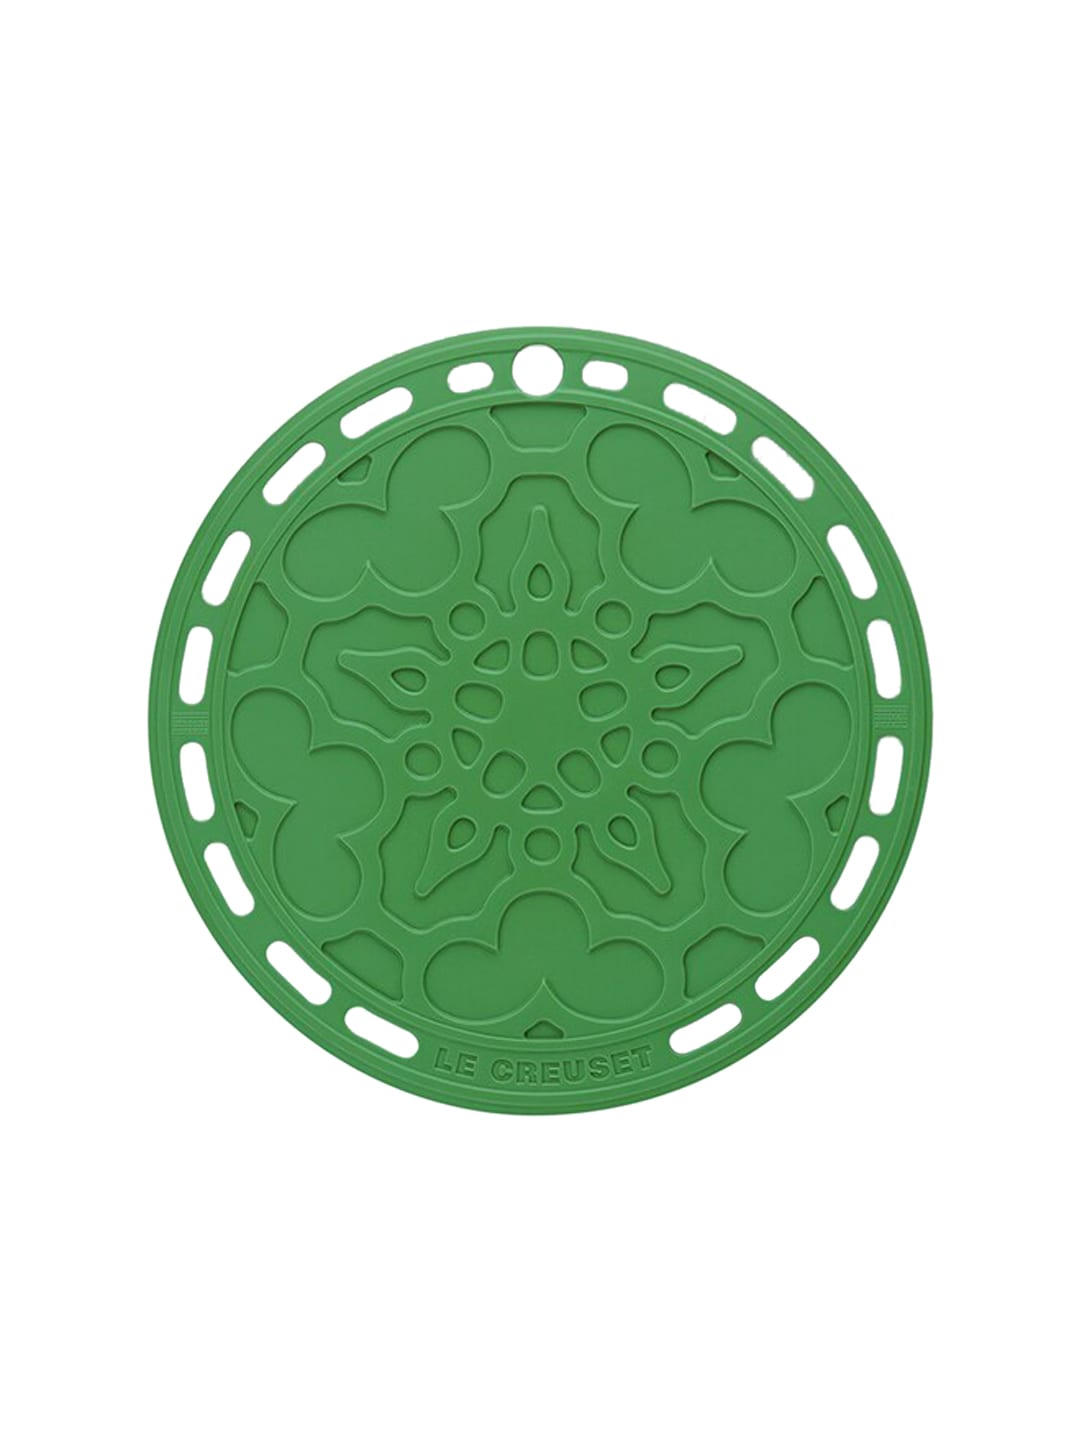 LE CREUSET Green Silicone French Trivet Price in India